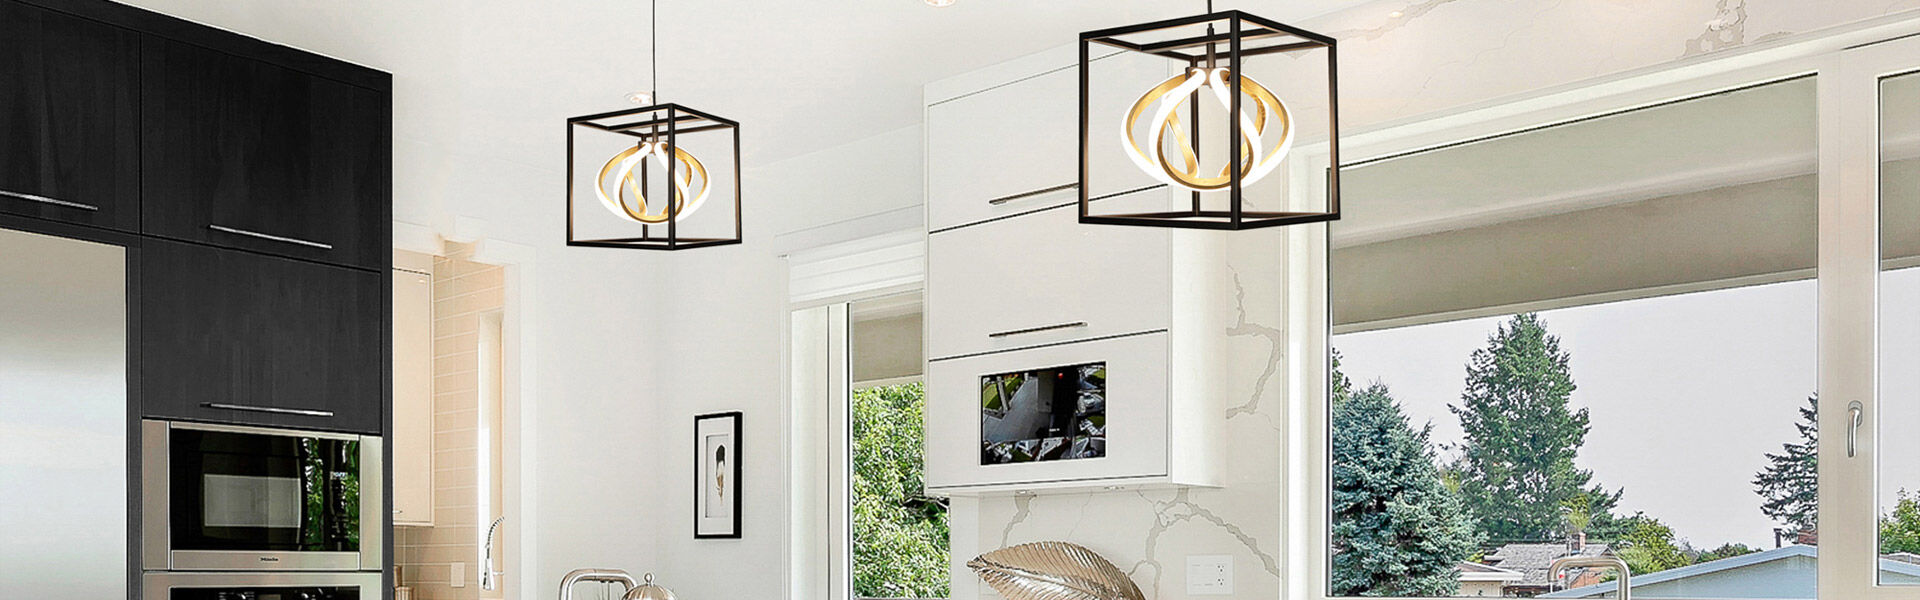 WAC Lighting | Up to 15% Off Select Designs | ends 6.3